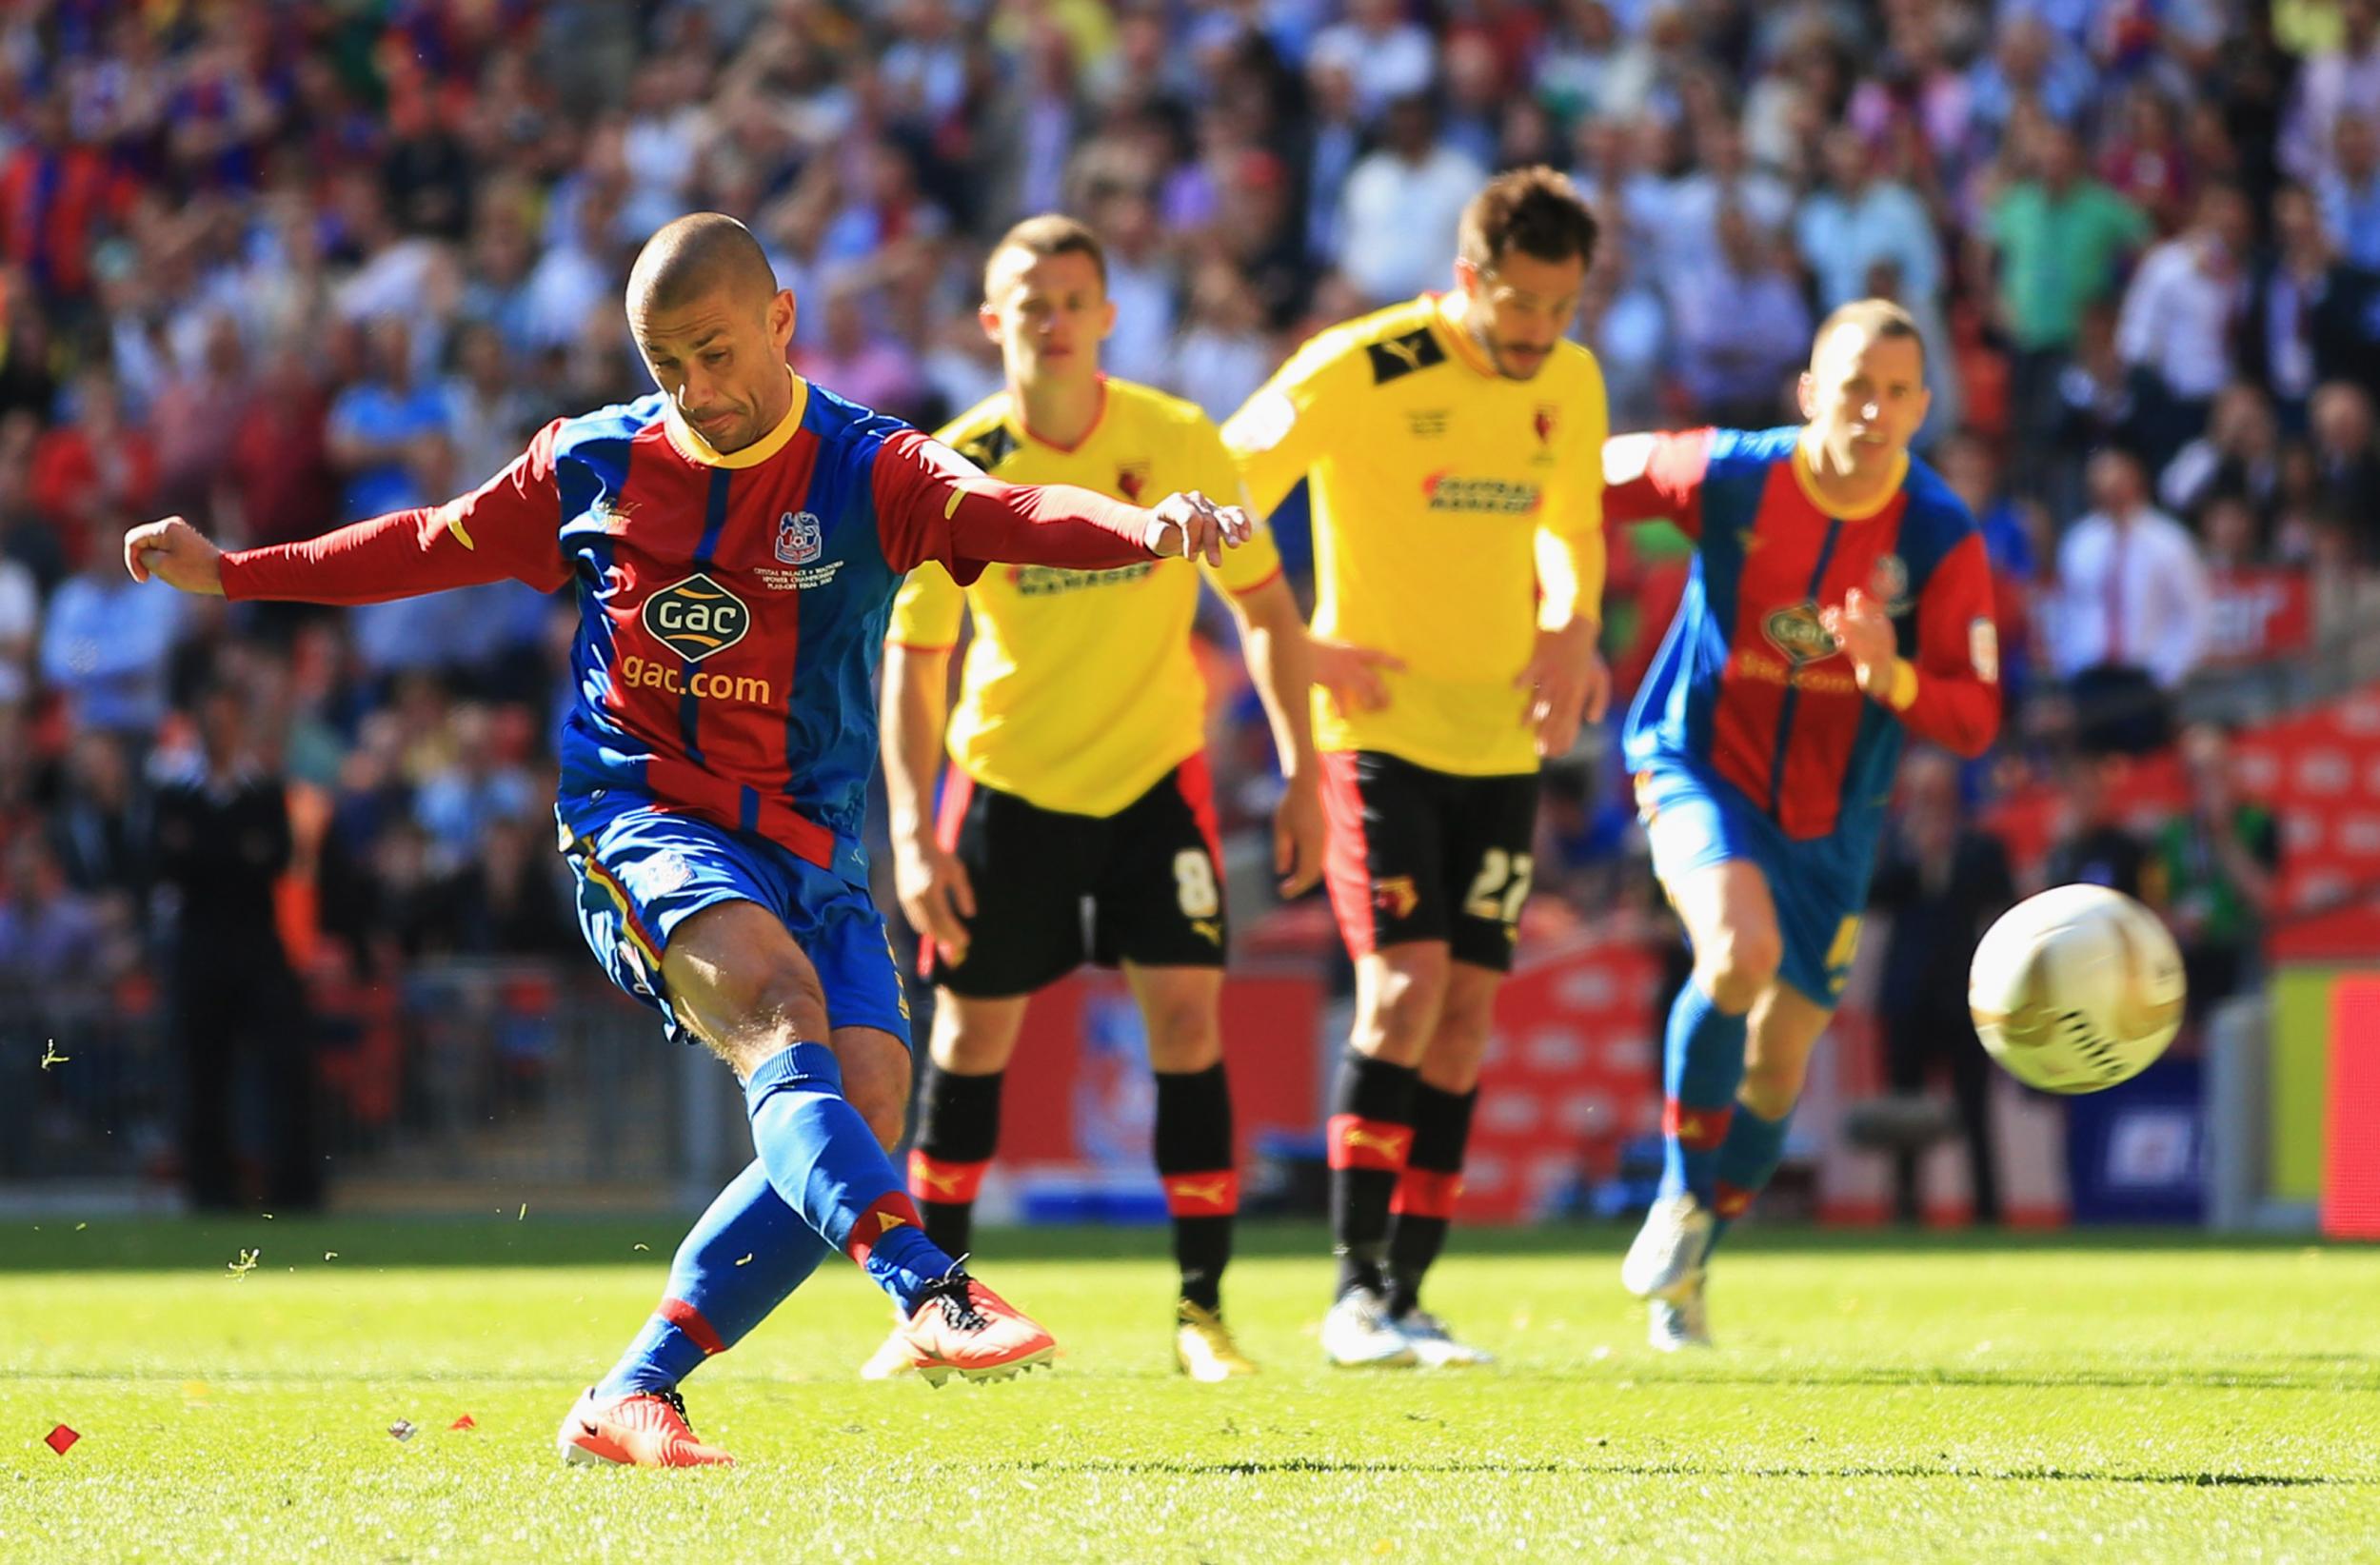 Phillips scores from the spot for Crystal Palace